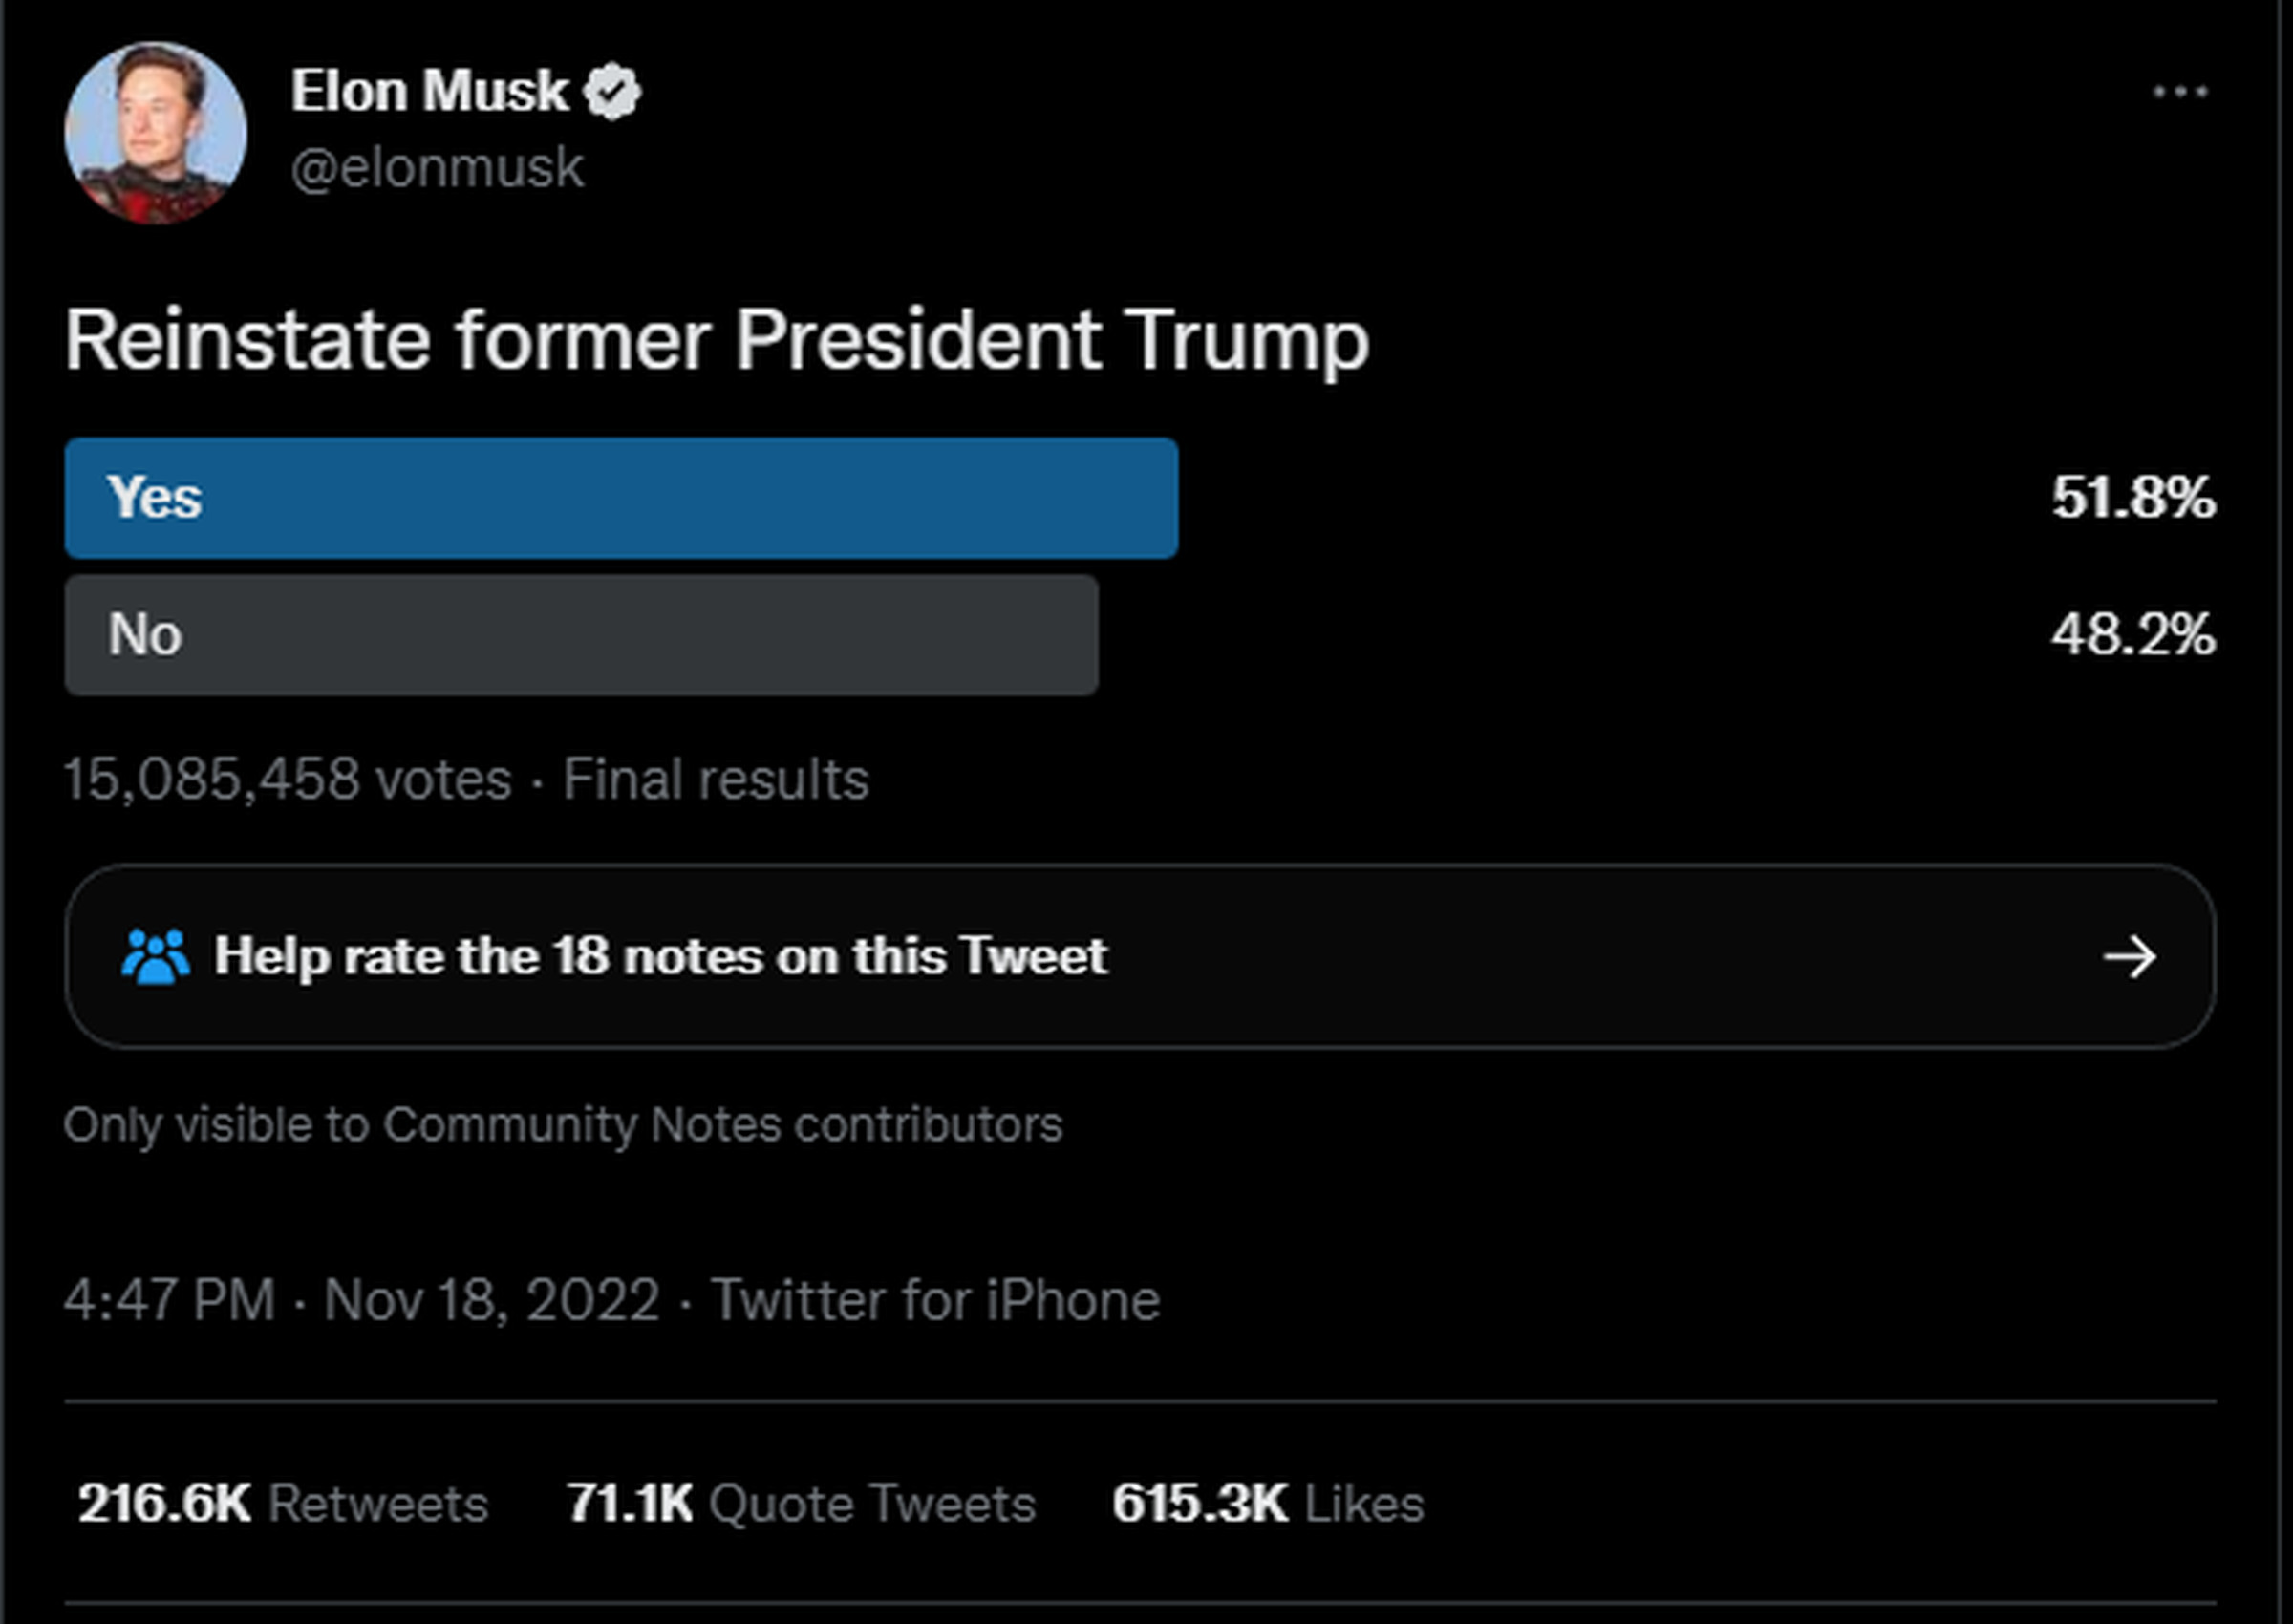 According to Musk's Twitter, 51.8 percent of respondents responded 